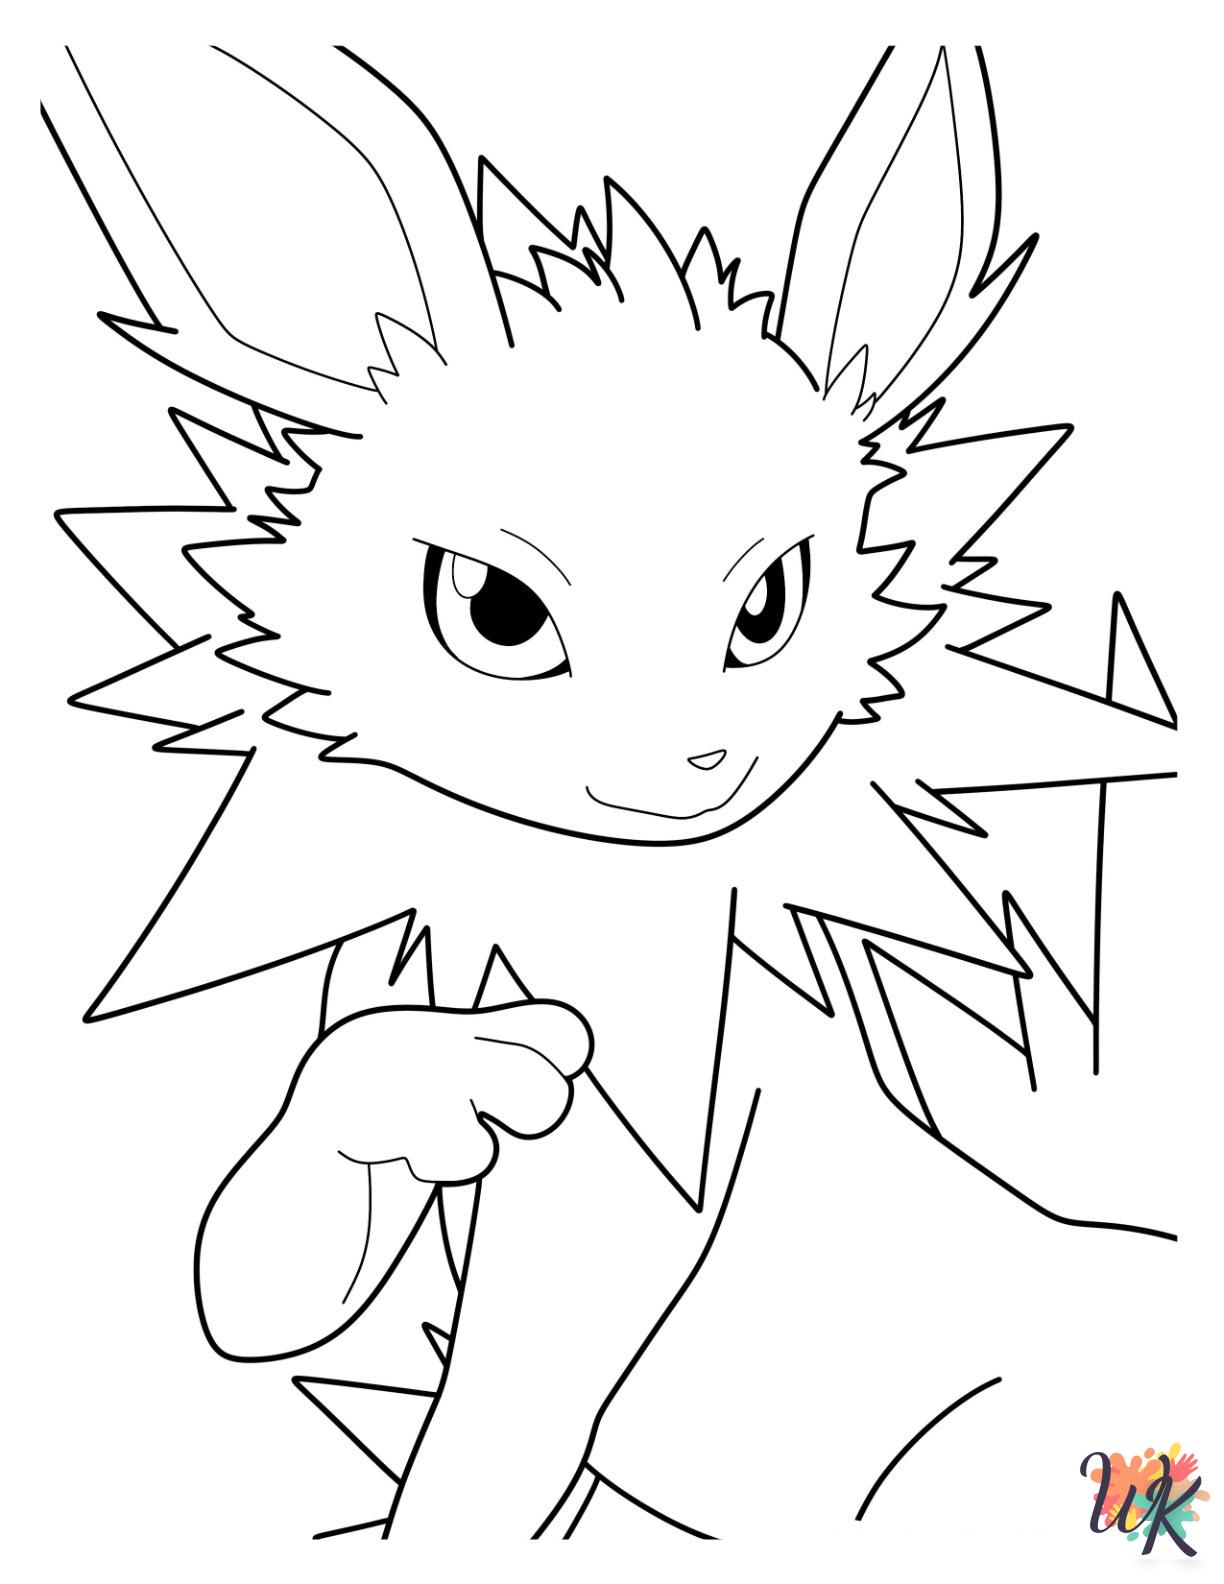 Jolteon coloring pages for adults pdf